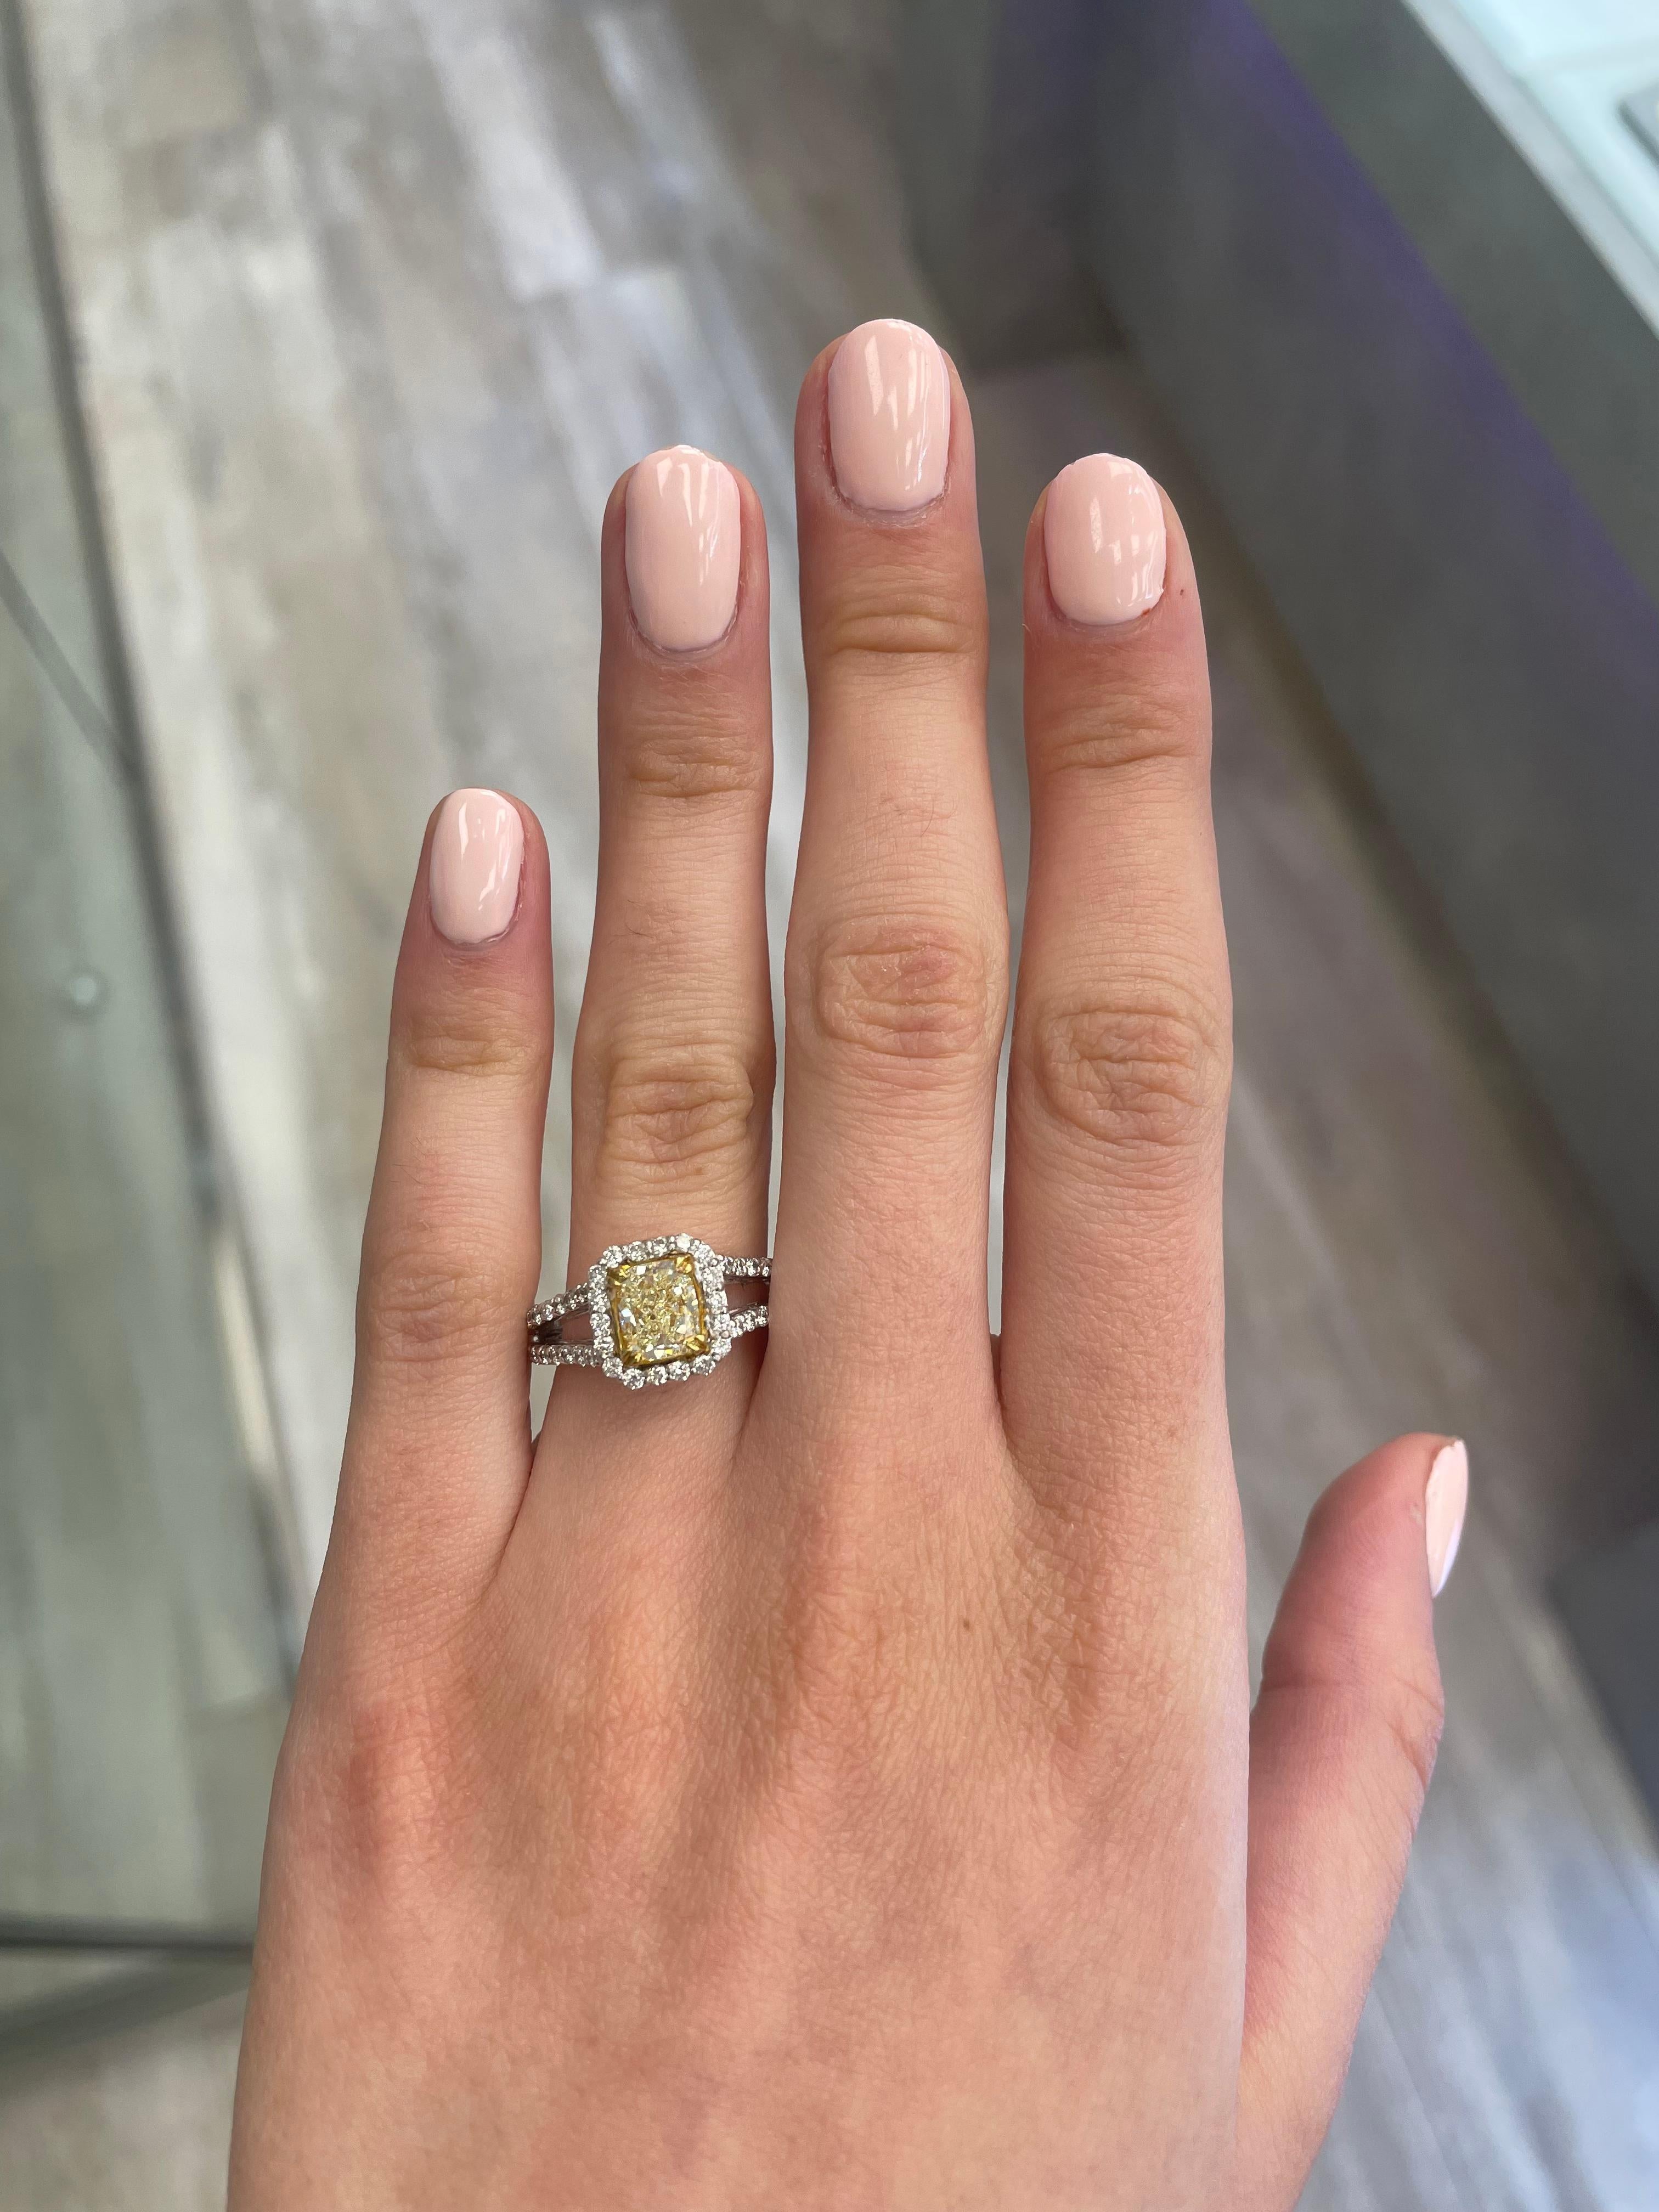 Stunning modern EGL certified yellow diamond with halo ring, two-tone 18k yellow and white gold. By Alexander Beverly Hills
2.08 carats total diamond weight.
1.36 carat cushion cut Fancy Yellow color and VS1 clarity diamond, EGL graded. Complimented